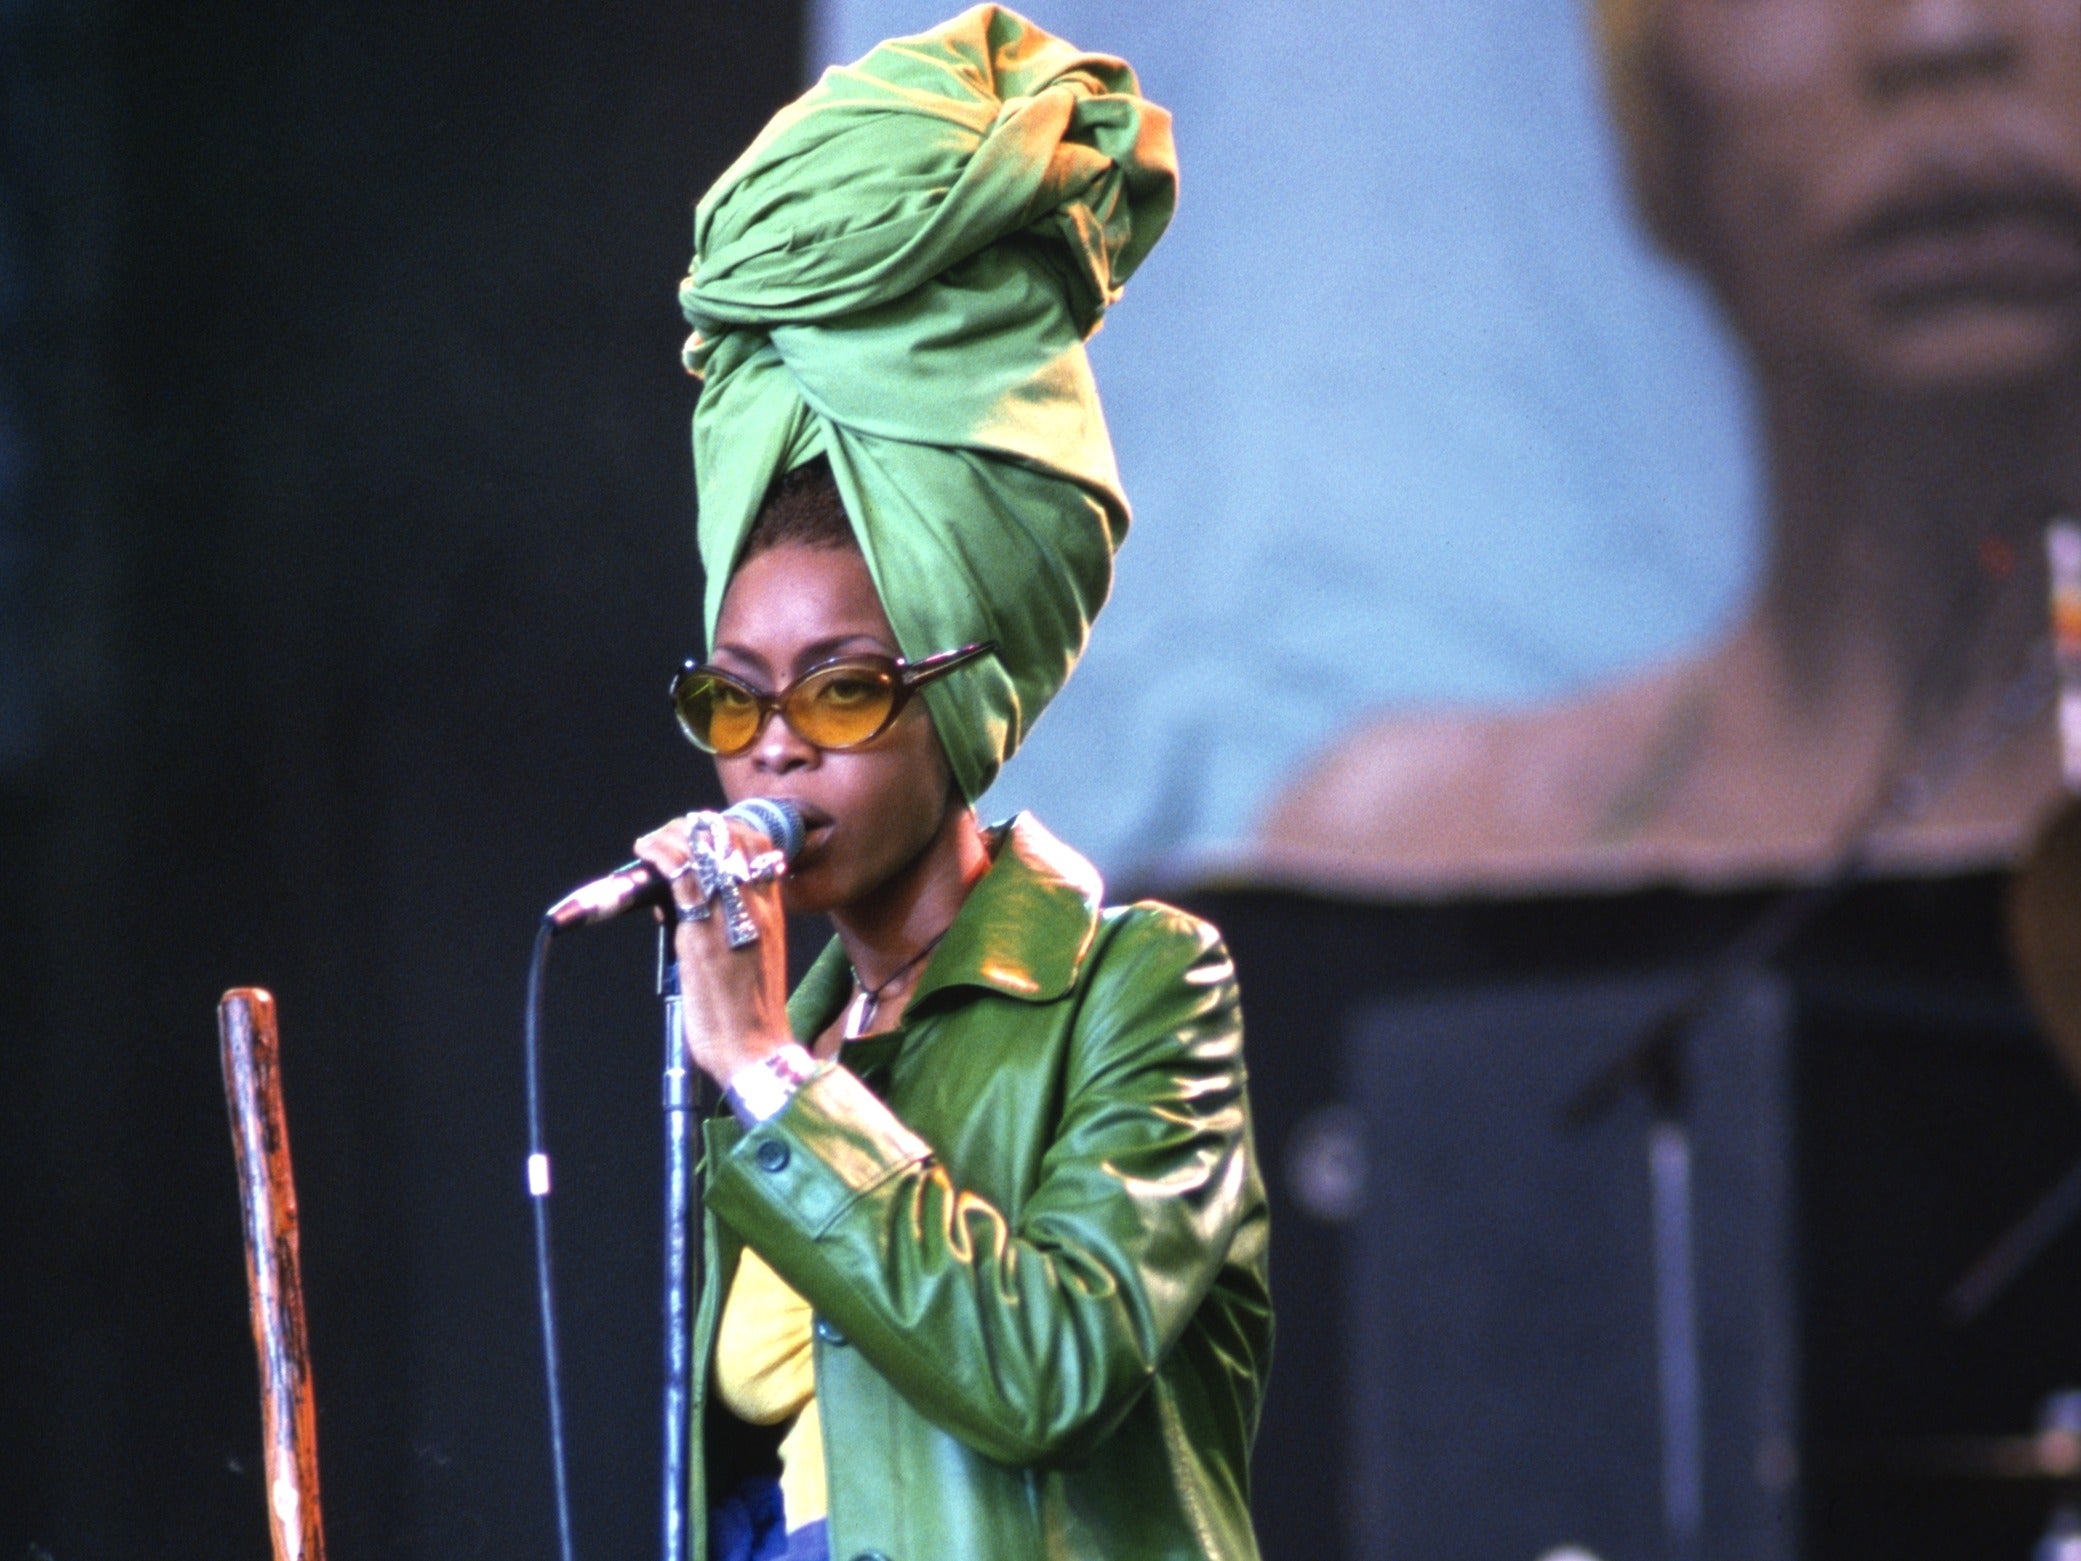 Channeling Nostalgia With This Celebrity Look: Erykah Badu